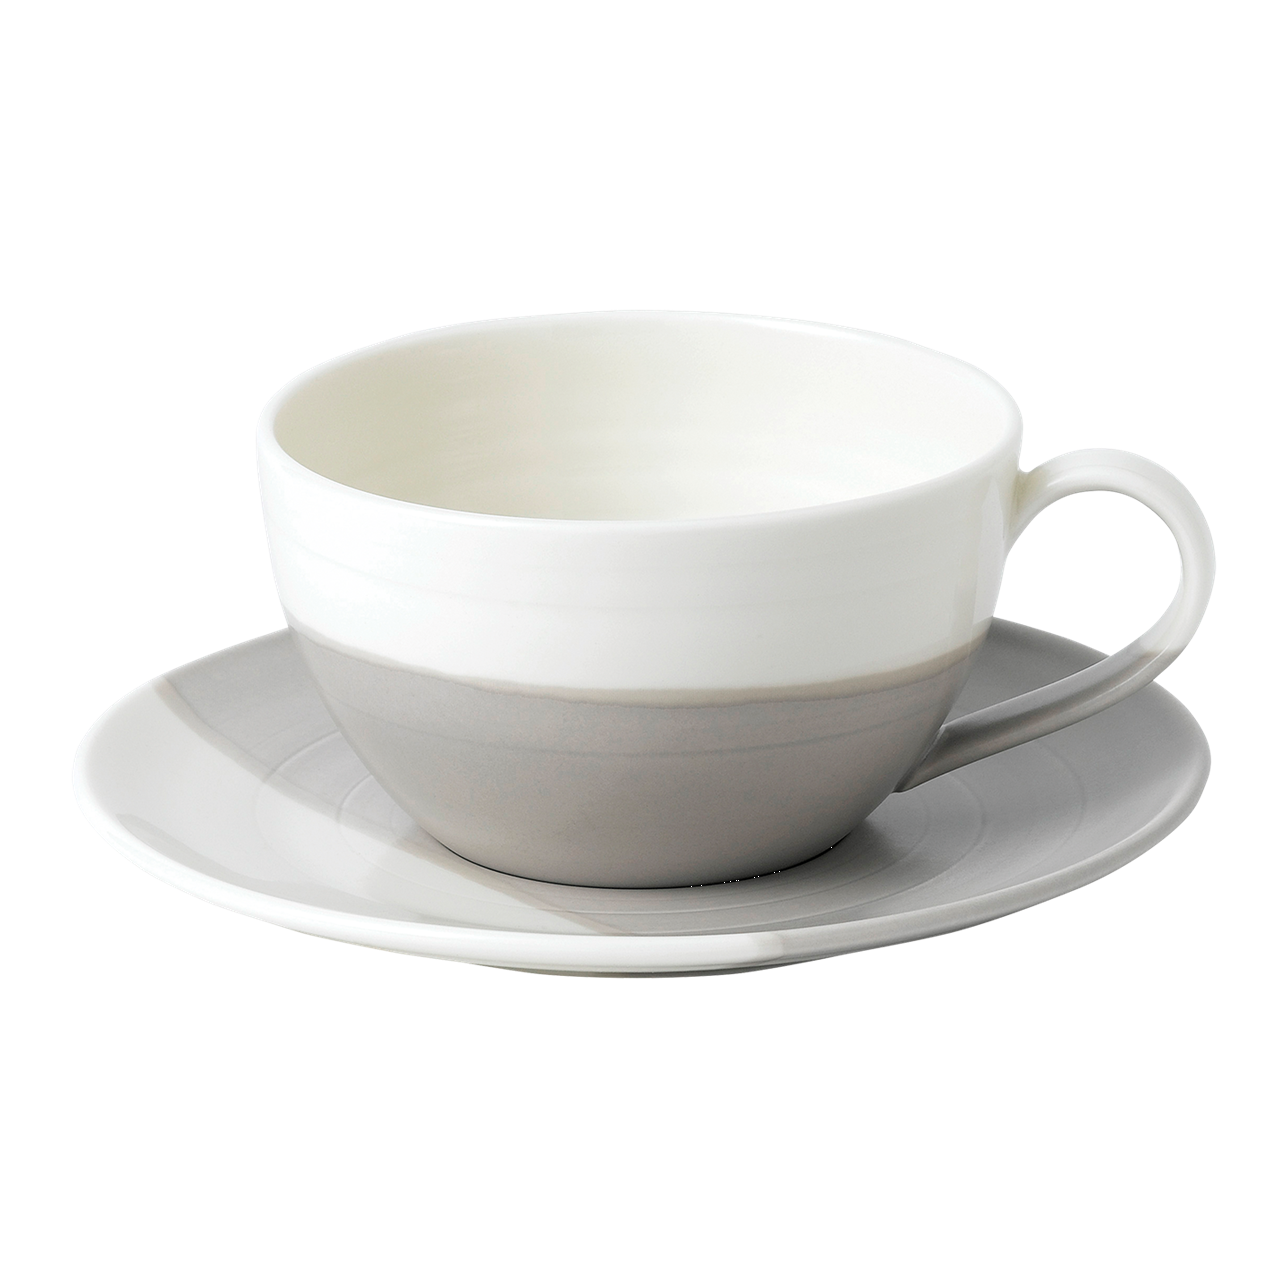 Coffee Studio Latte Cup and Saucer